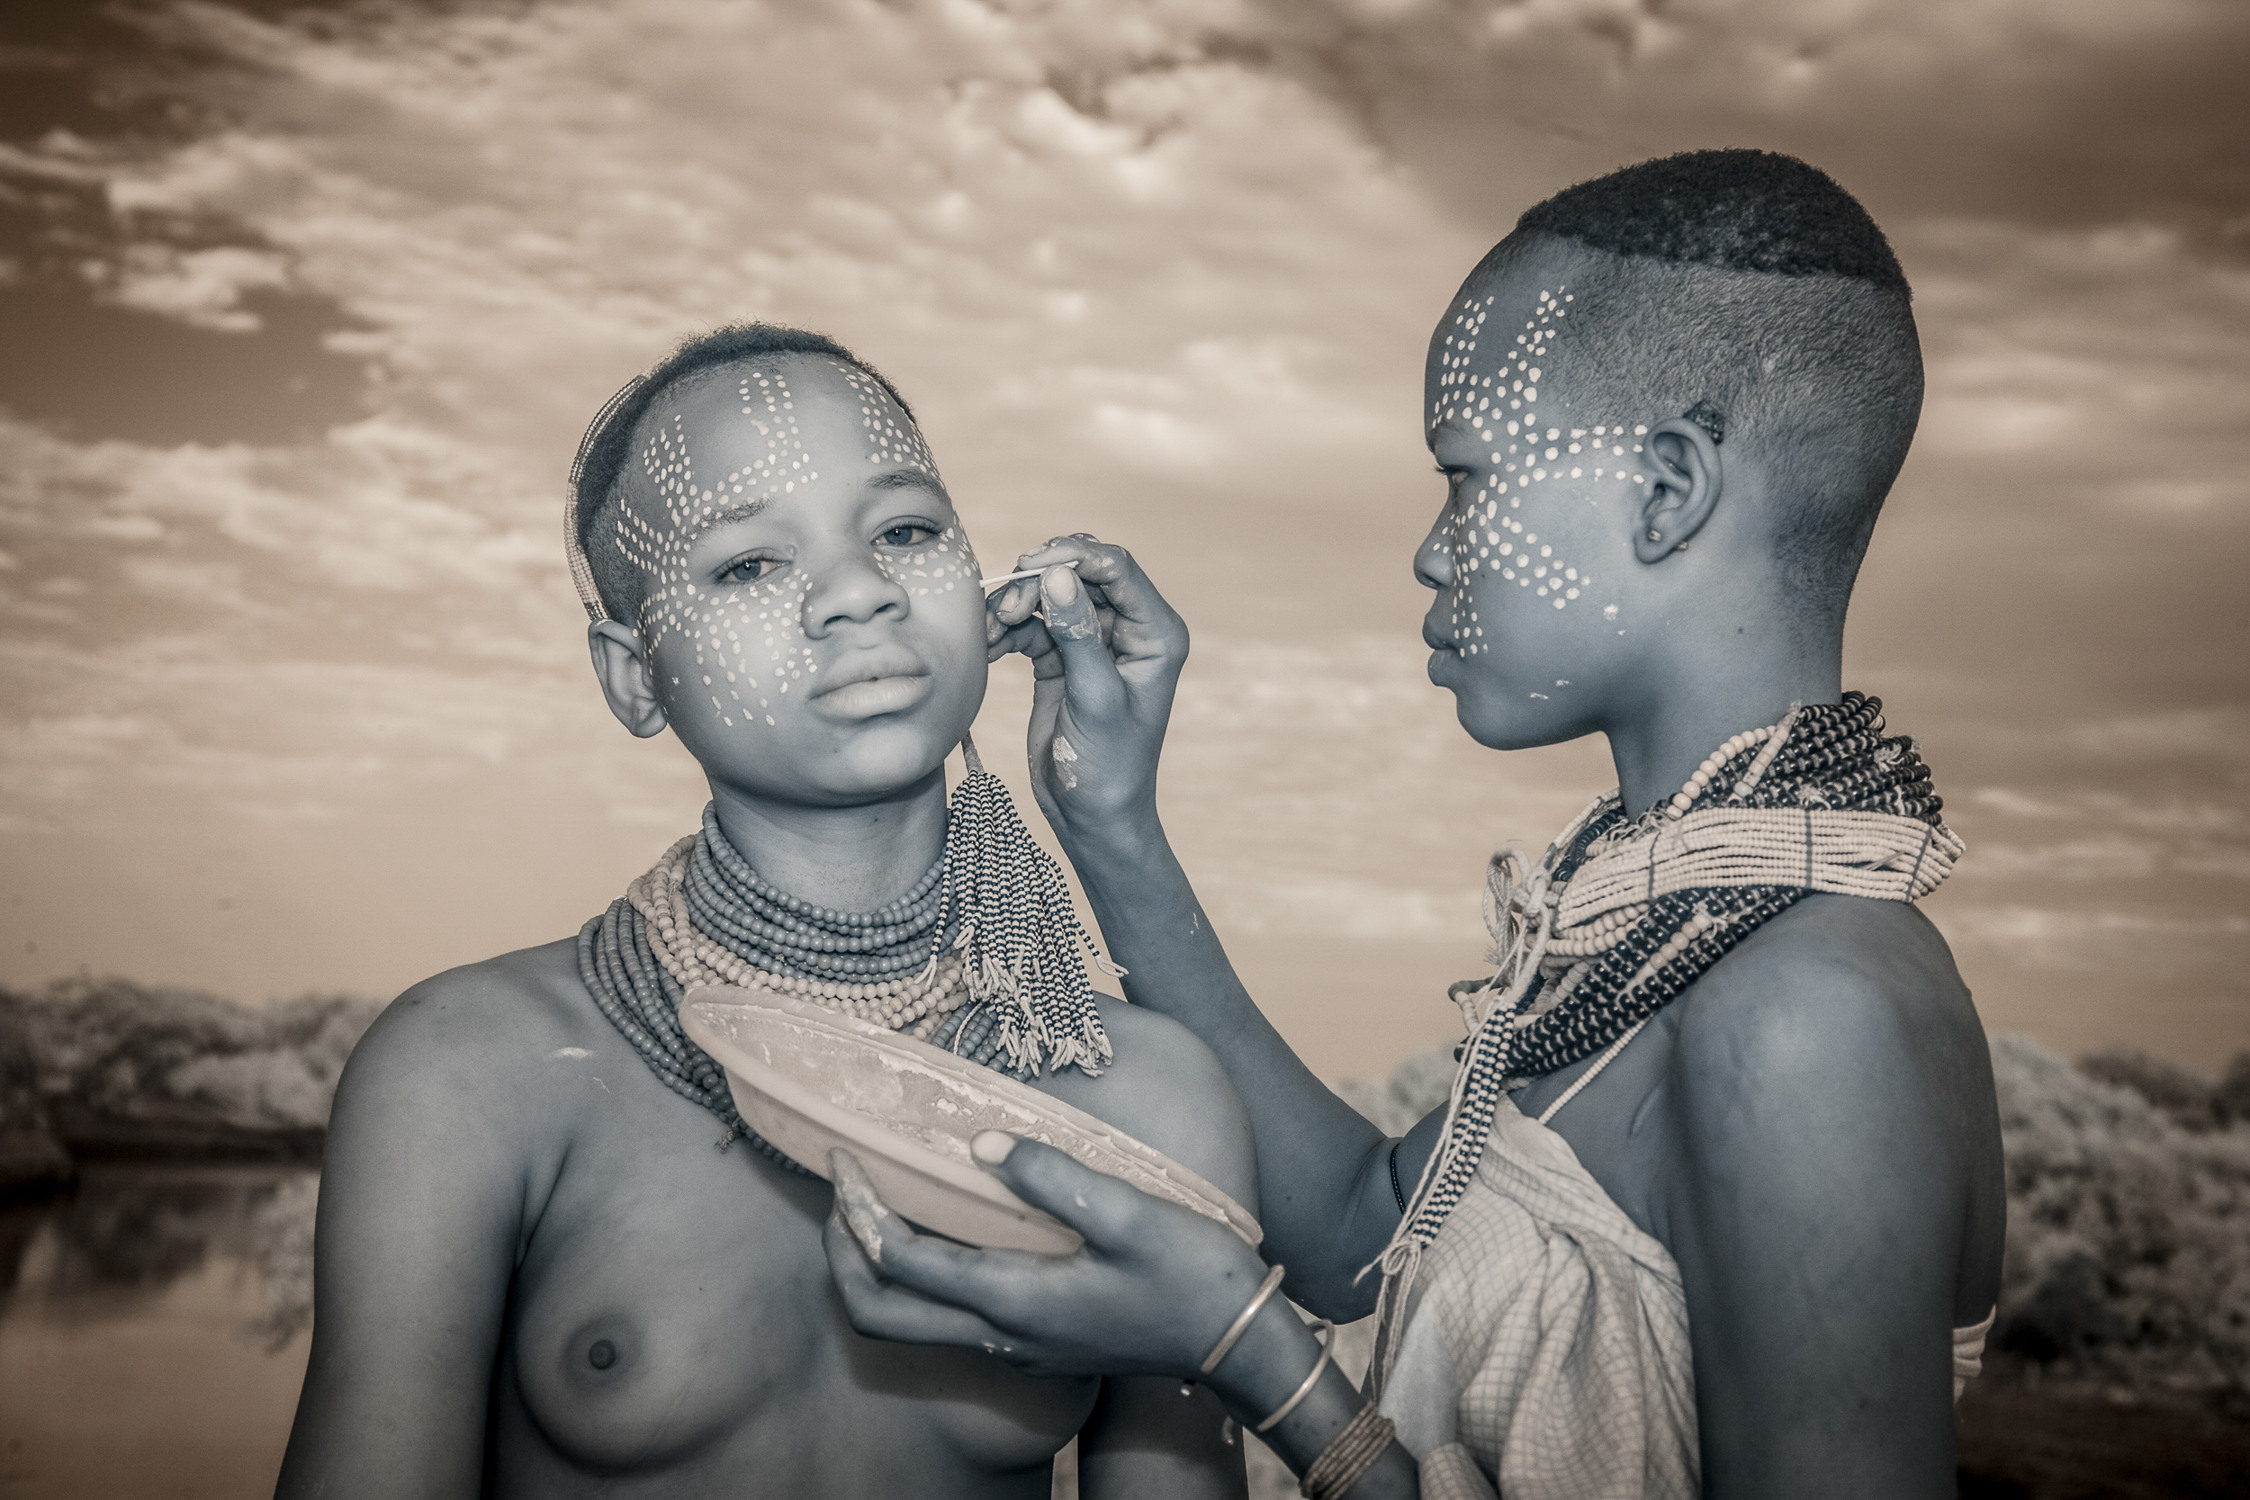   The Karo are artistic by nature,&nbsp;known for their alluring and intricate body and face painting.  